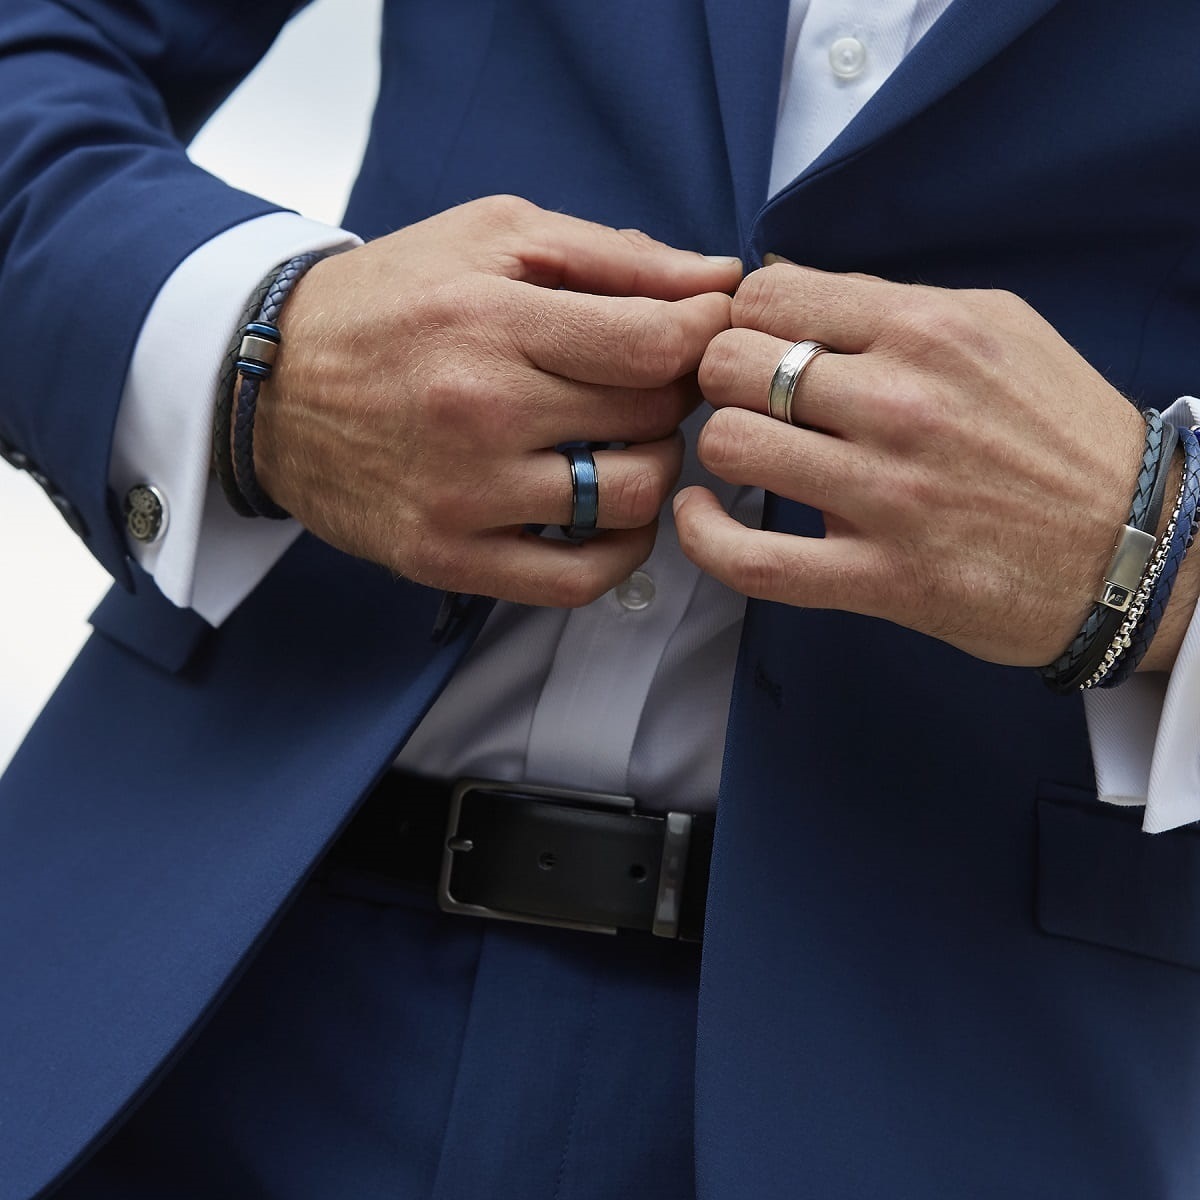 6 Reasons Why Titanium Wedding Rings are Great for Men